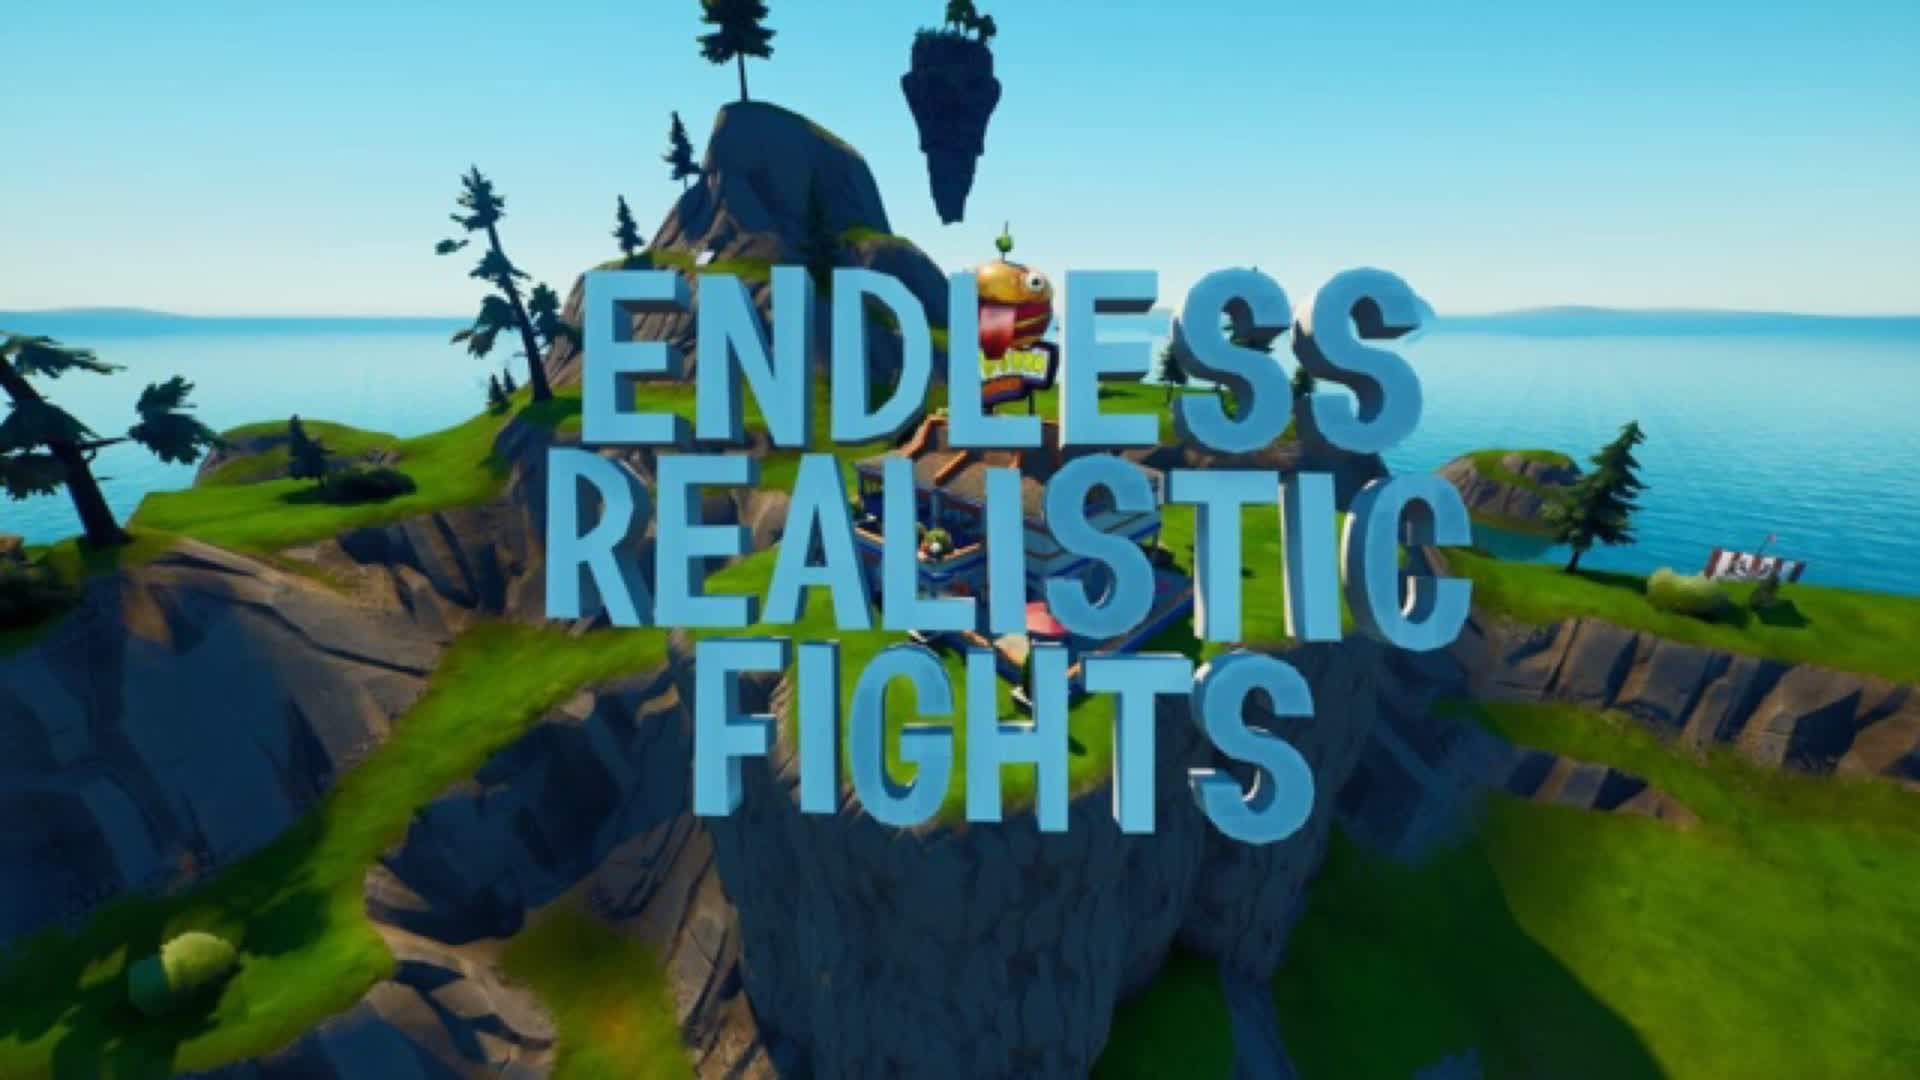 Endless Realistic Fights